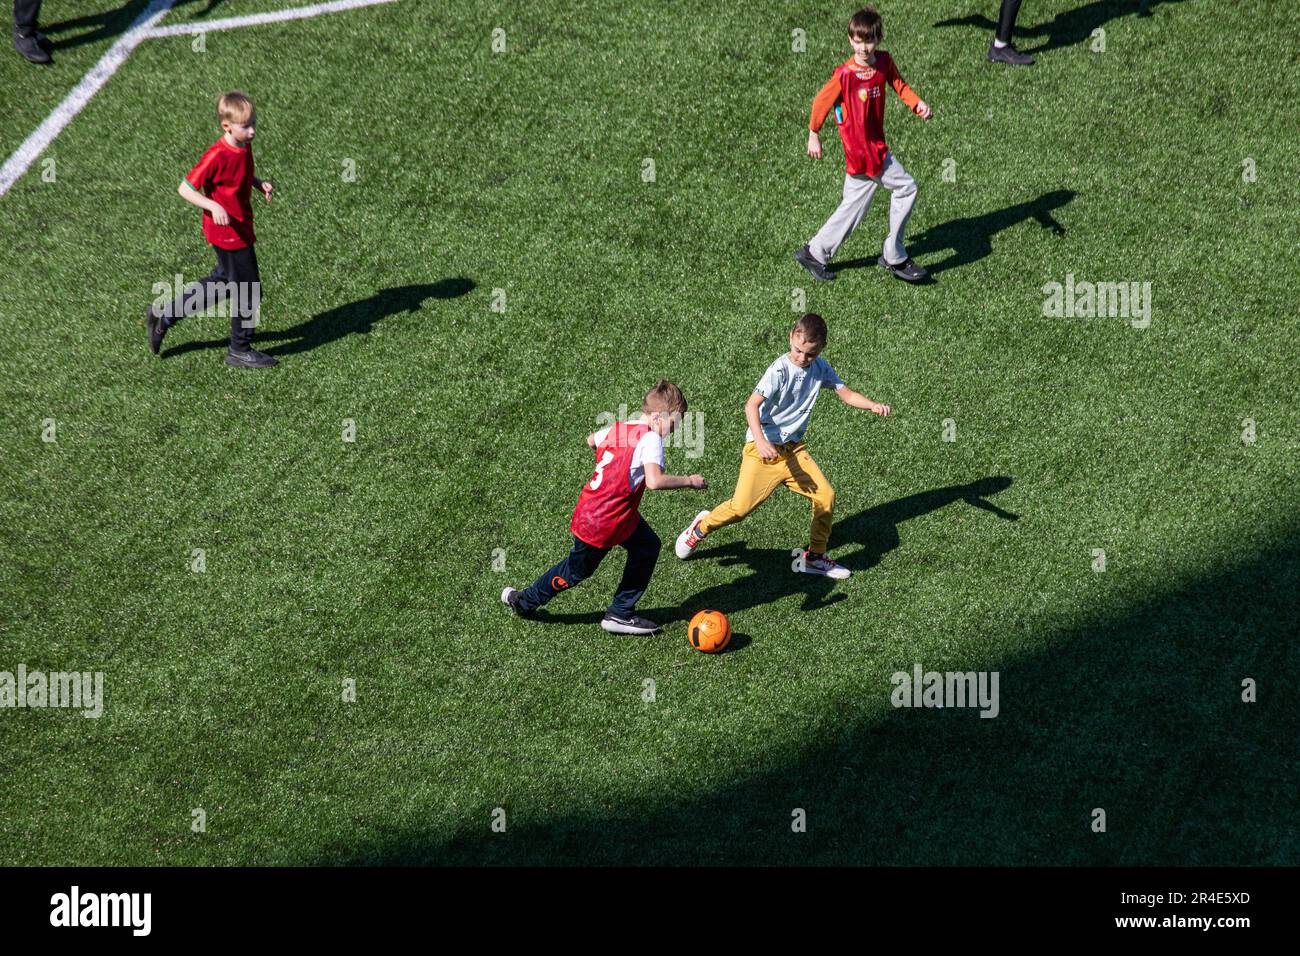 High-angle view of school boys playing football on artificial turf at Snelli Staadion in Tallinn, Estonia Stock Photo